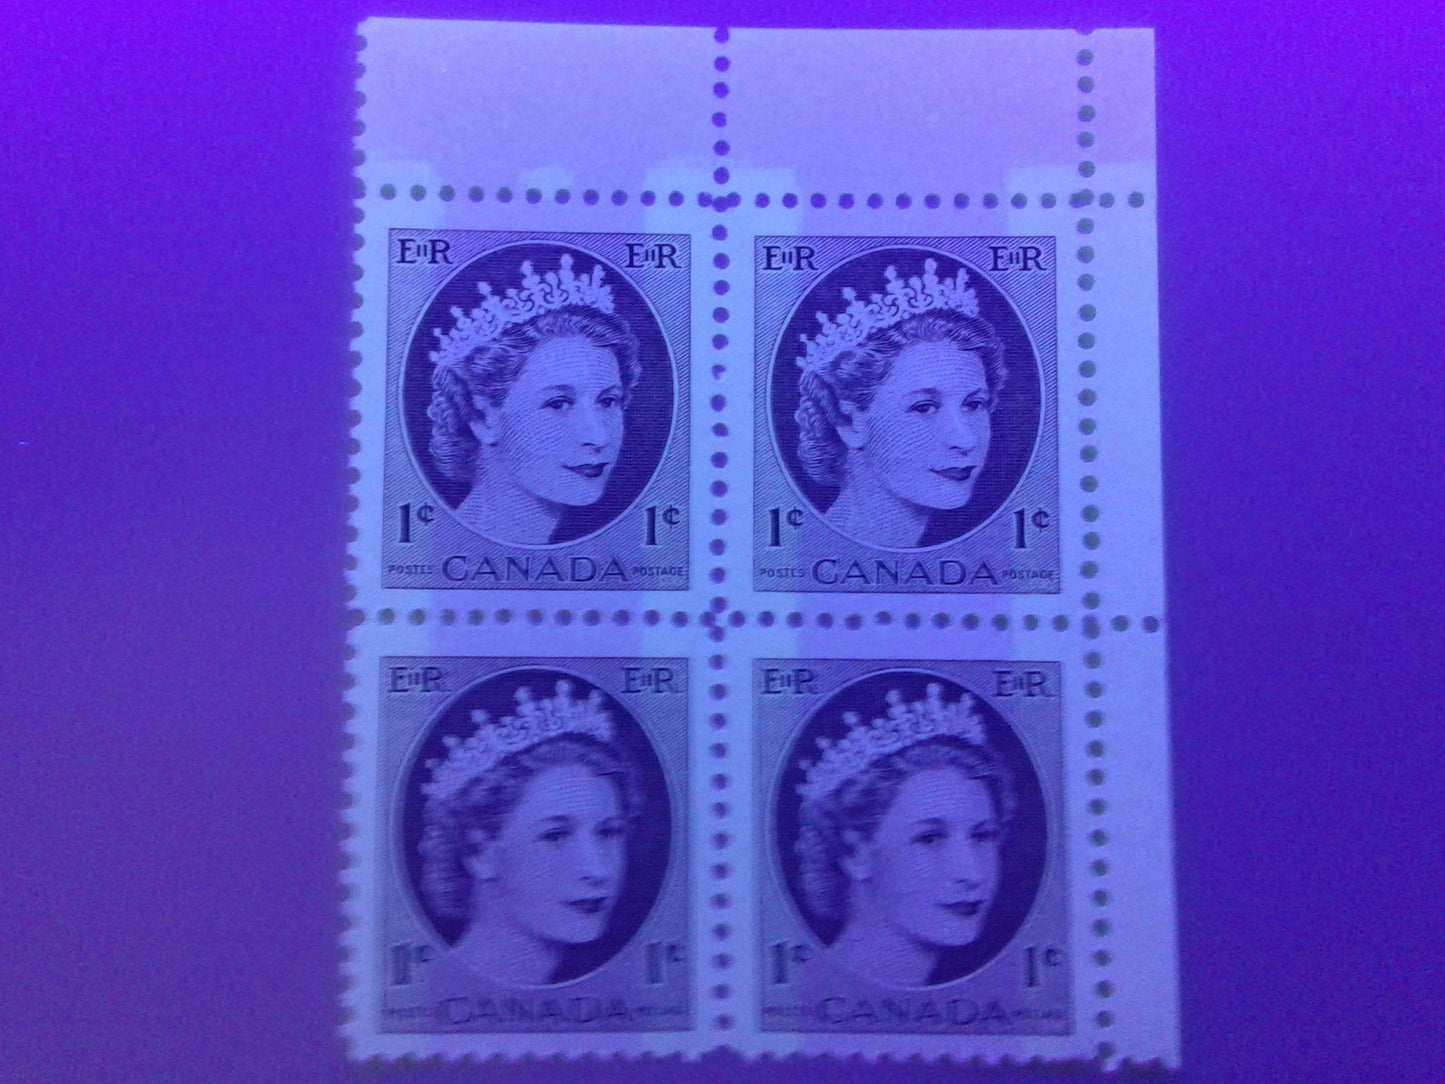 Canada #337p(var) 1c Chocolate Queen Elizabeth II, 1954-1962 Wilding Issue, Upper Right Blank Winnipeg Tagged Blocks of 4, Two Different, Various Perfs., DF Gr Vertically Ribbed Paper, Streaky Semi Gloss Gum, Bluish White Tagging With Extra Spot, VFNH Brixton Chrome 